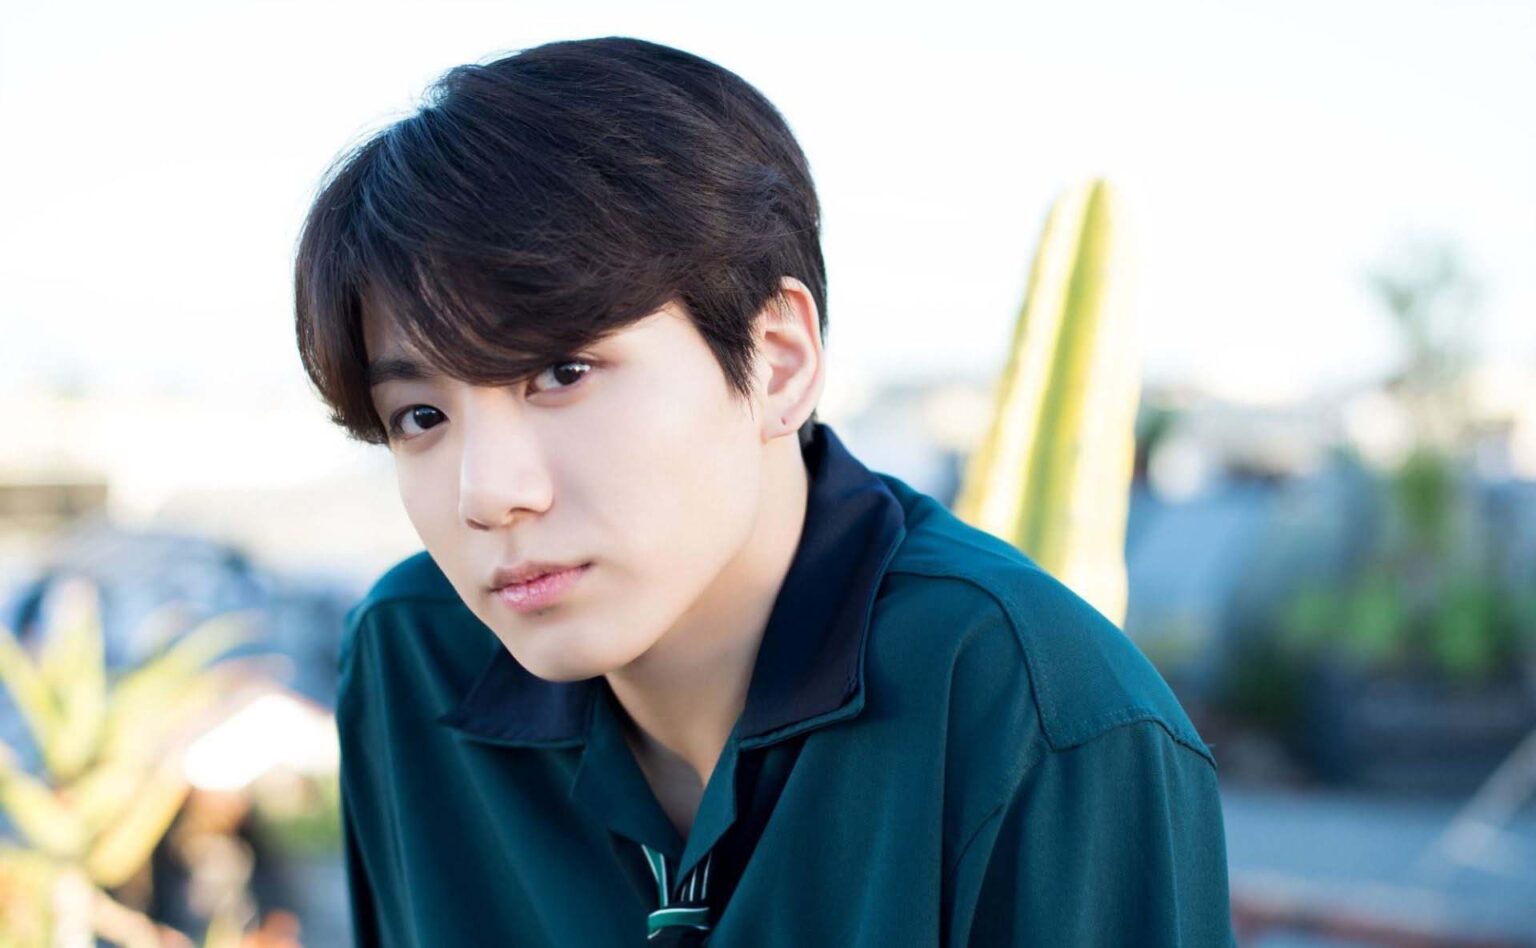 Is Jungkook your favorite member of BTS? Prove your love by answering all of these questions correctly!